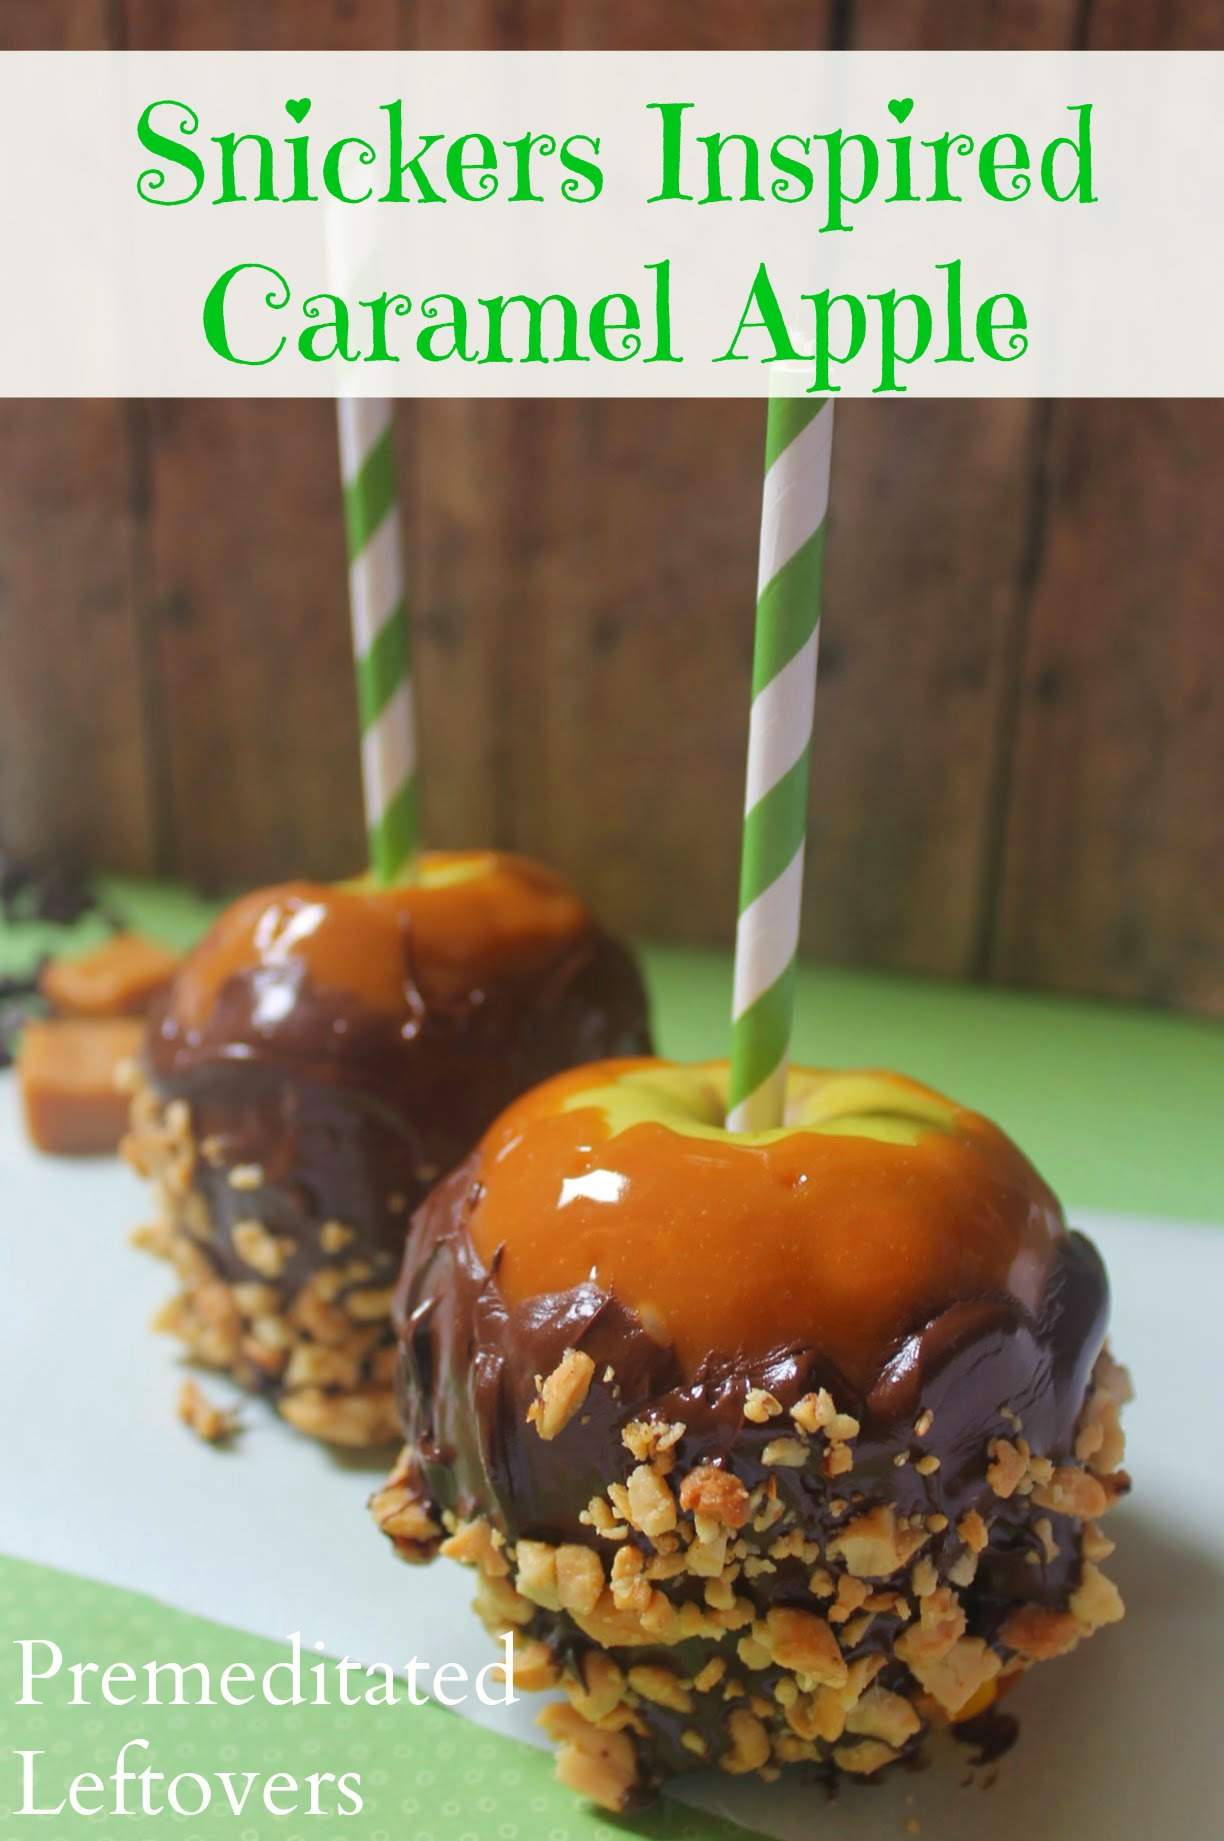 Snickers Inspired Caramel Apple Recipe